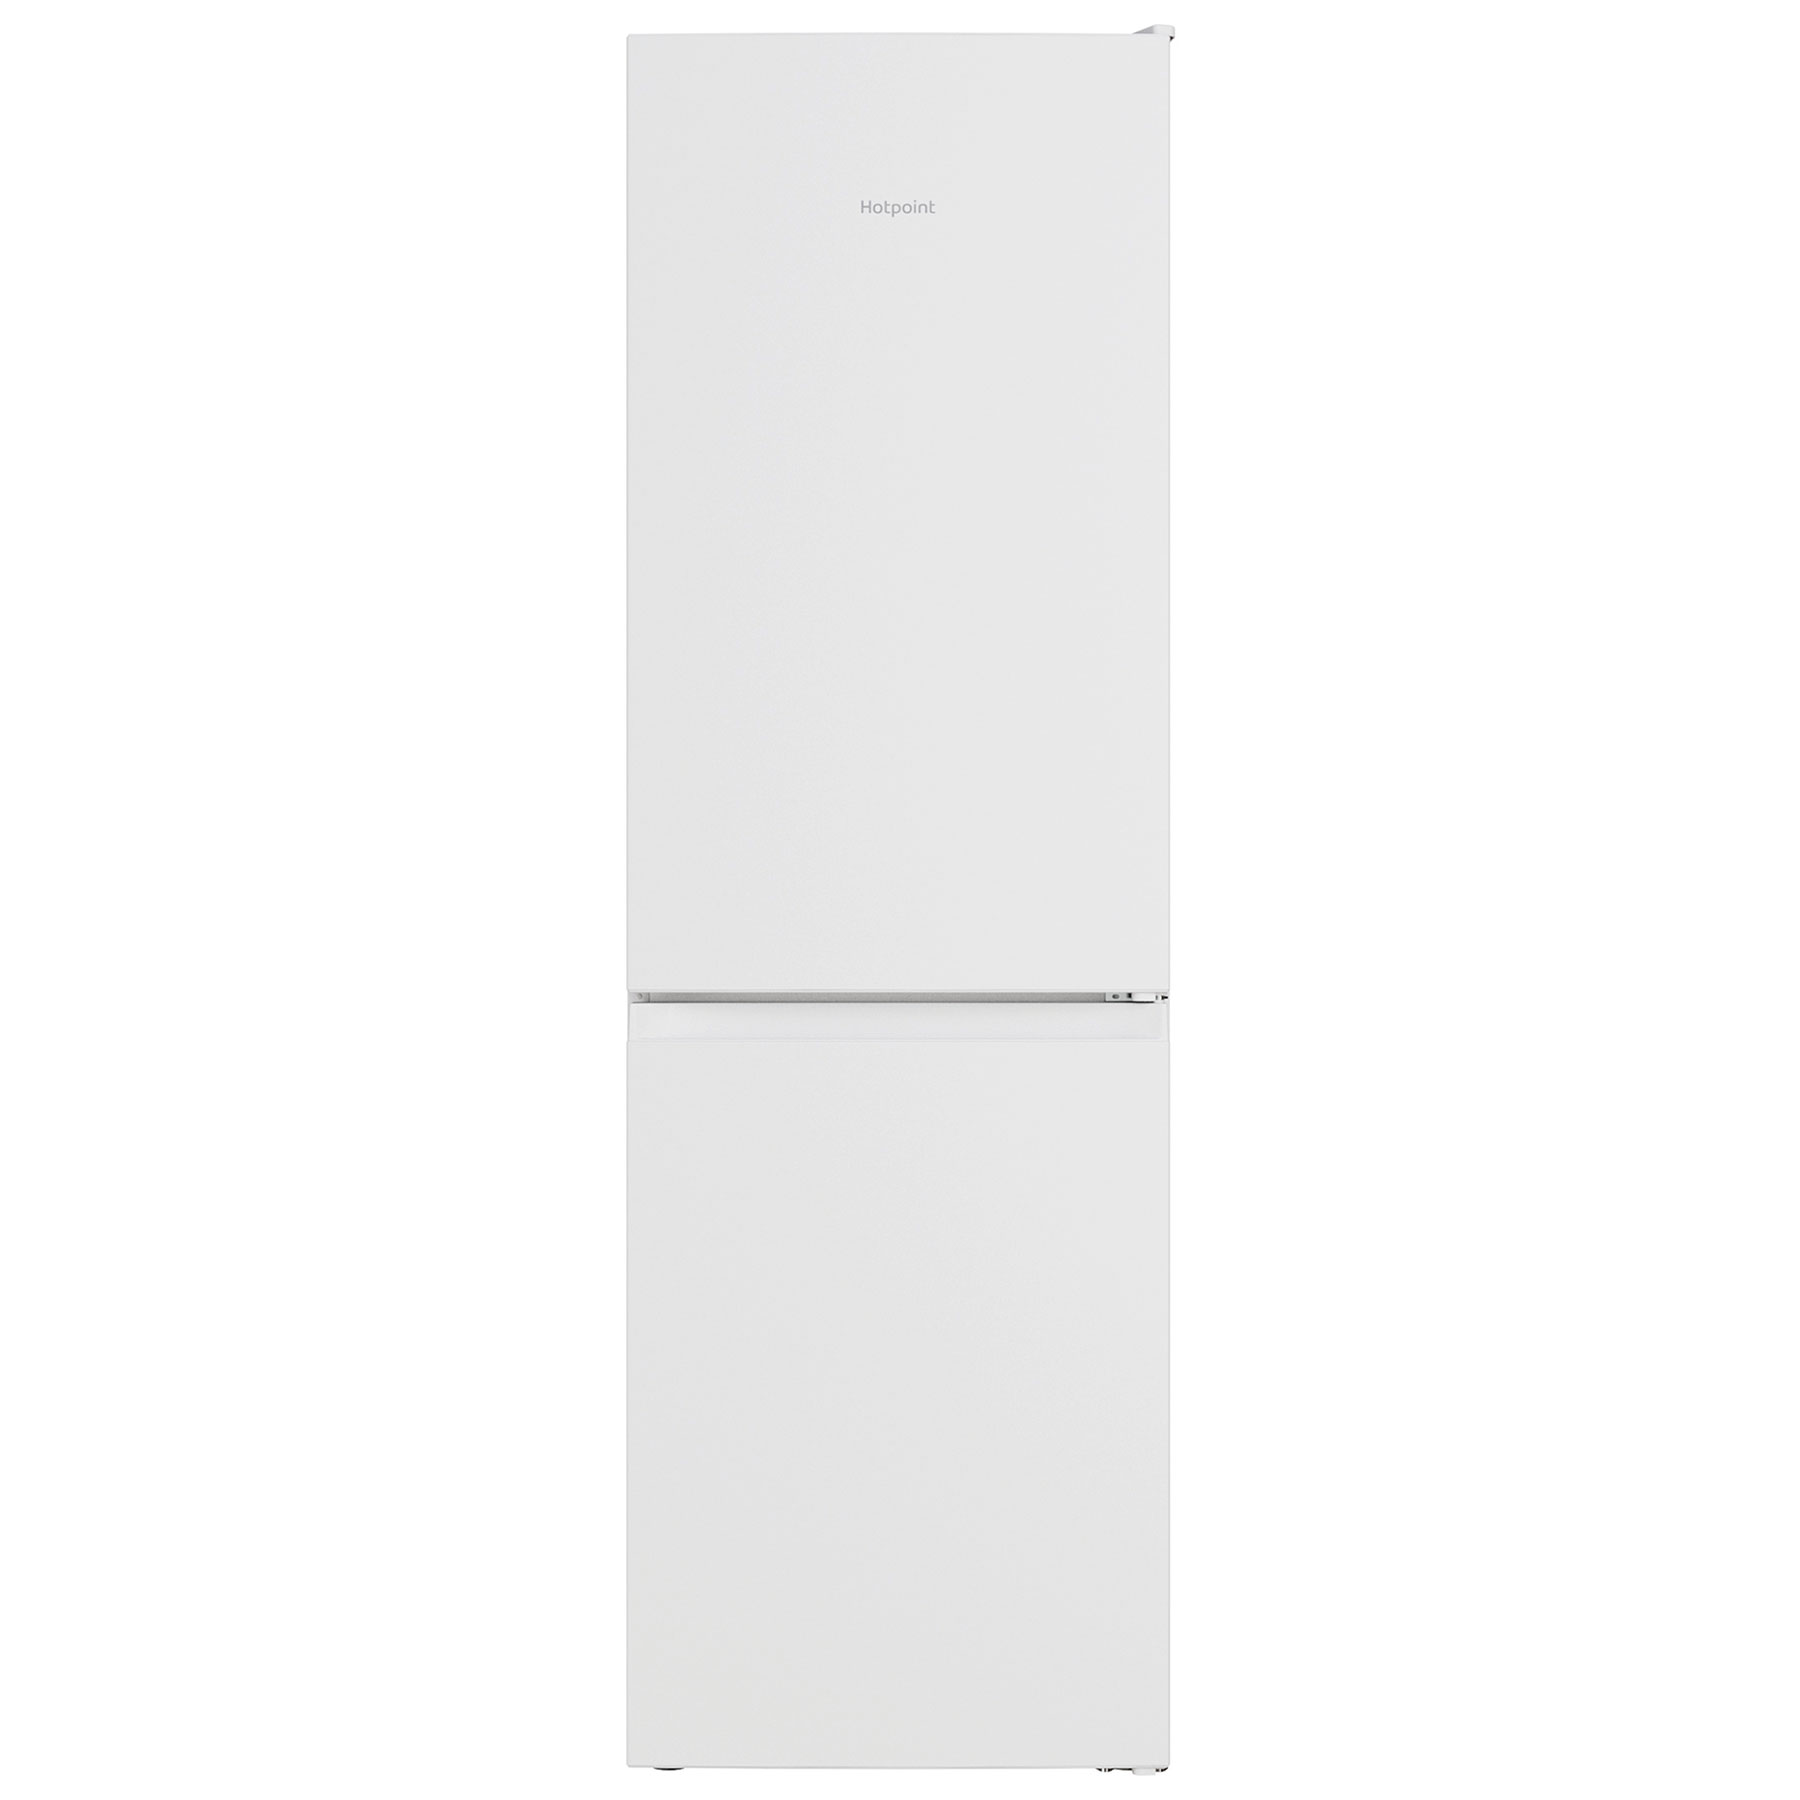 Hotpoint H7X83AW2 60cm Frost Free Fridge Freezer in White 1 91m D Rate